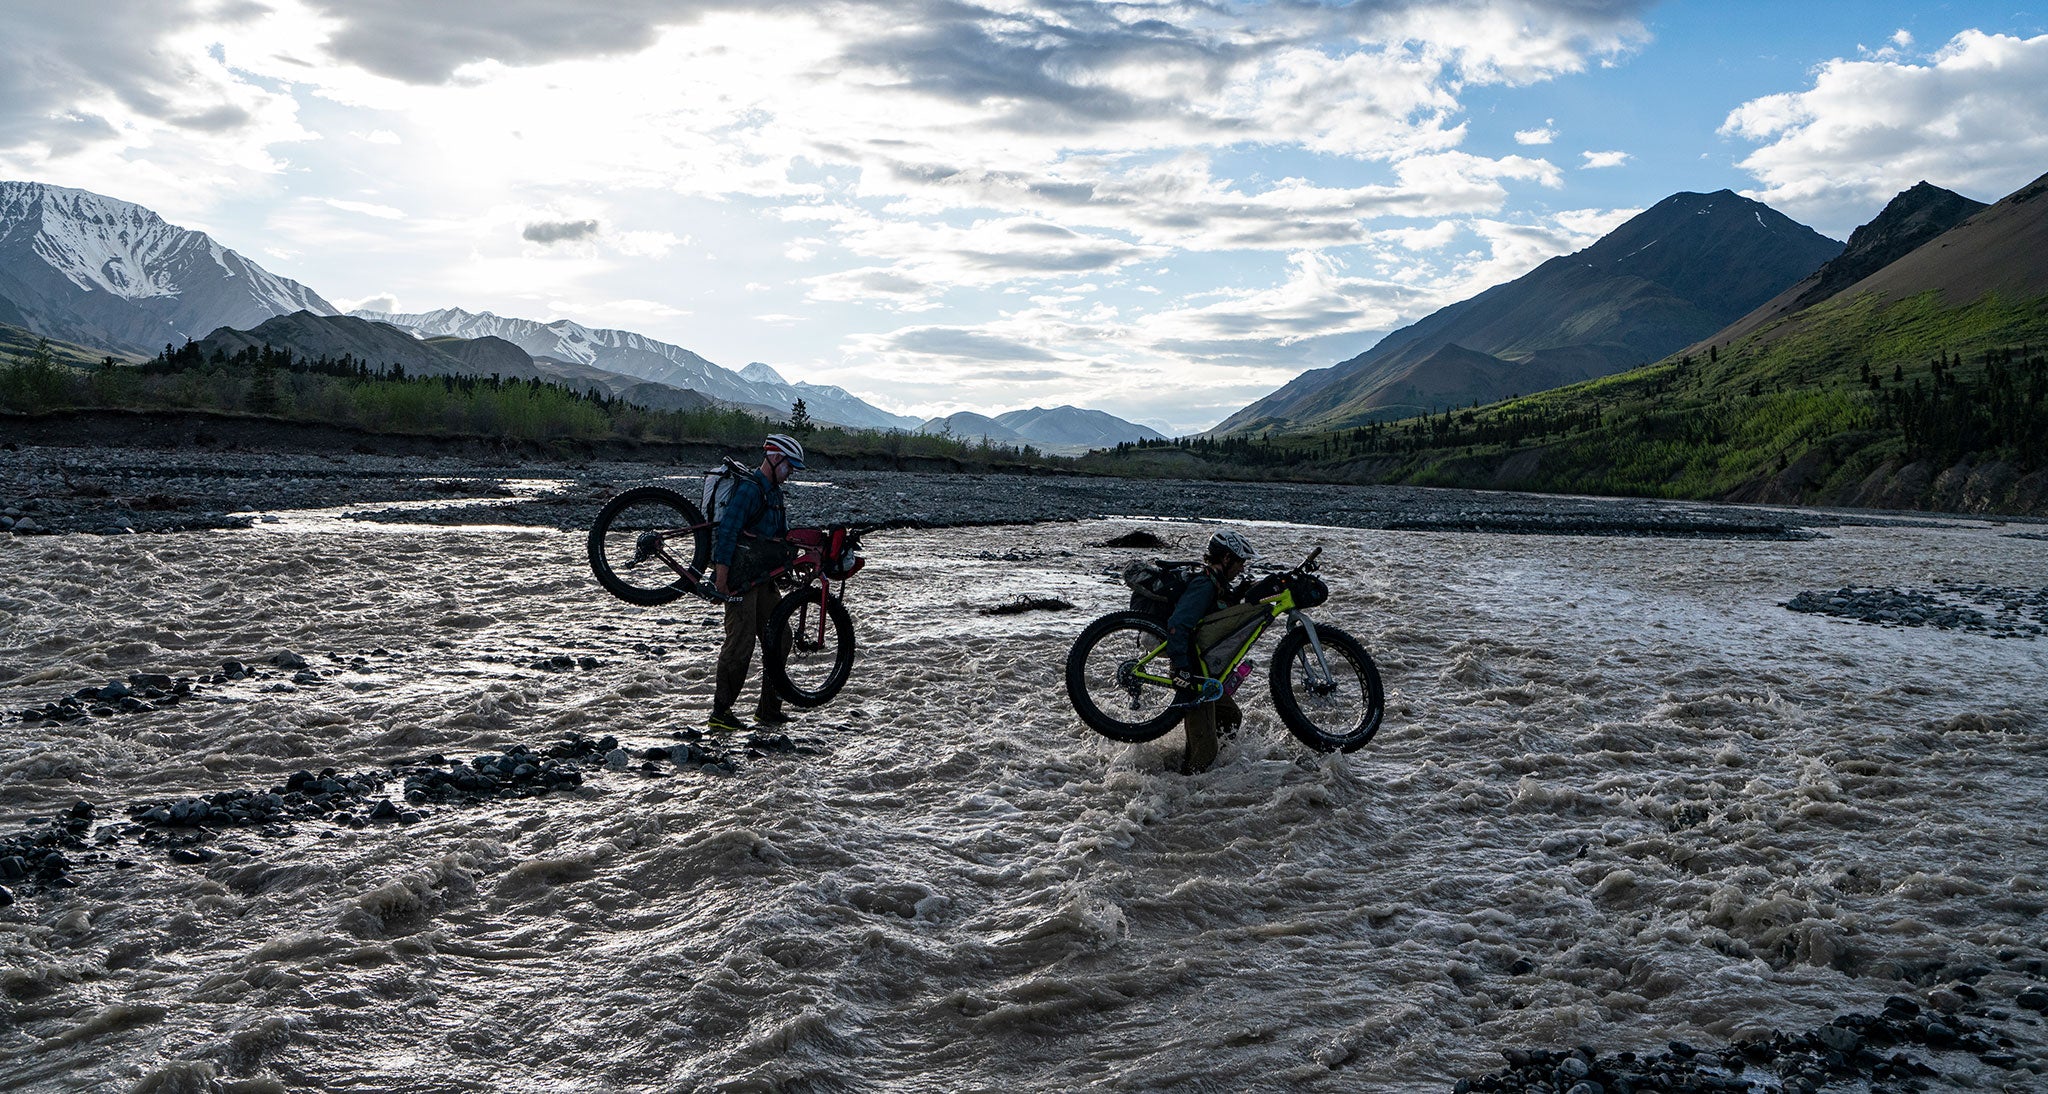 Ultralight bikepackers crossing a river while carrying bikes